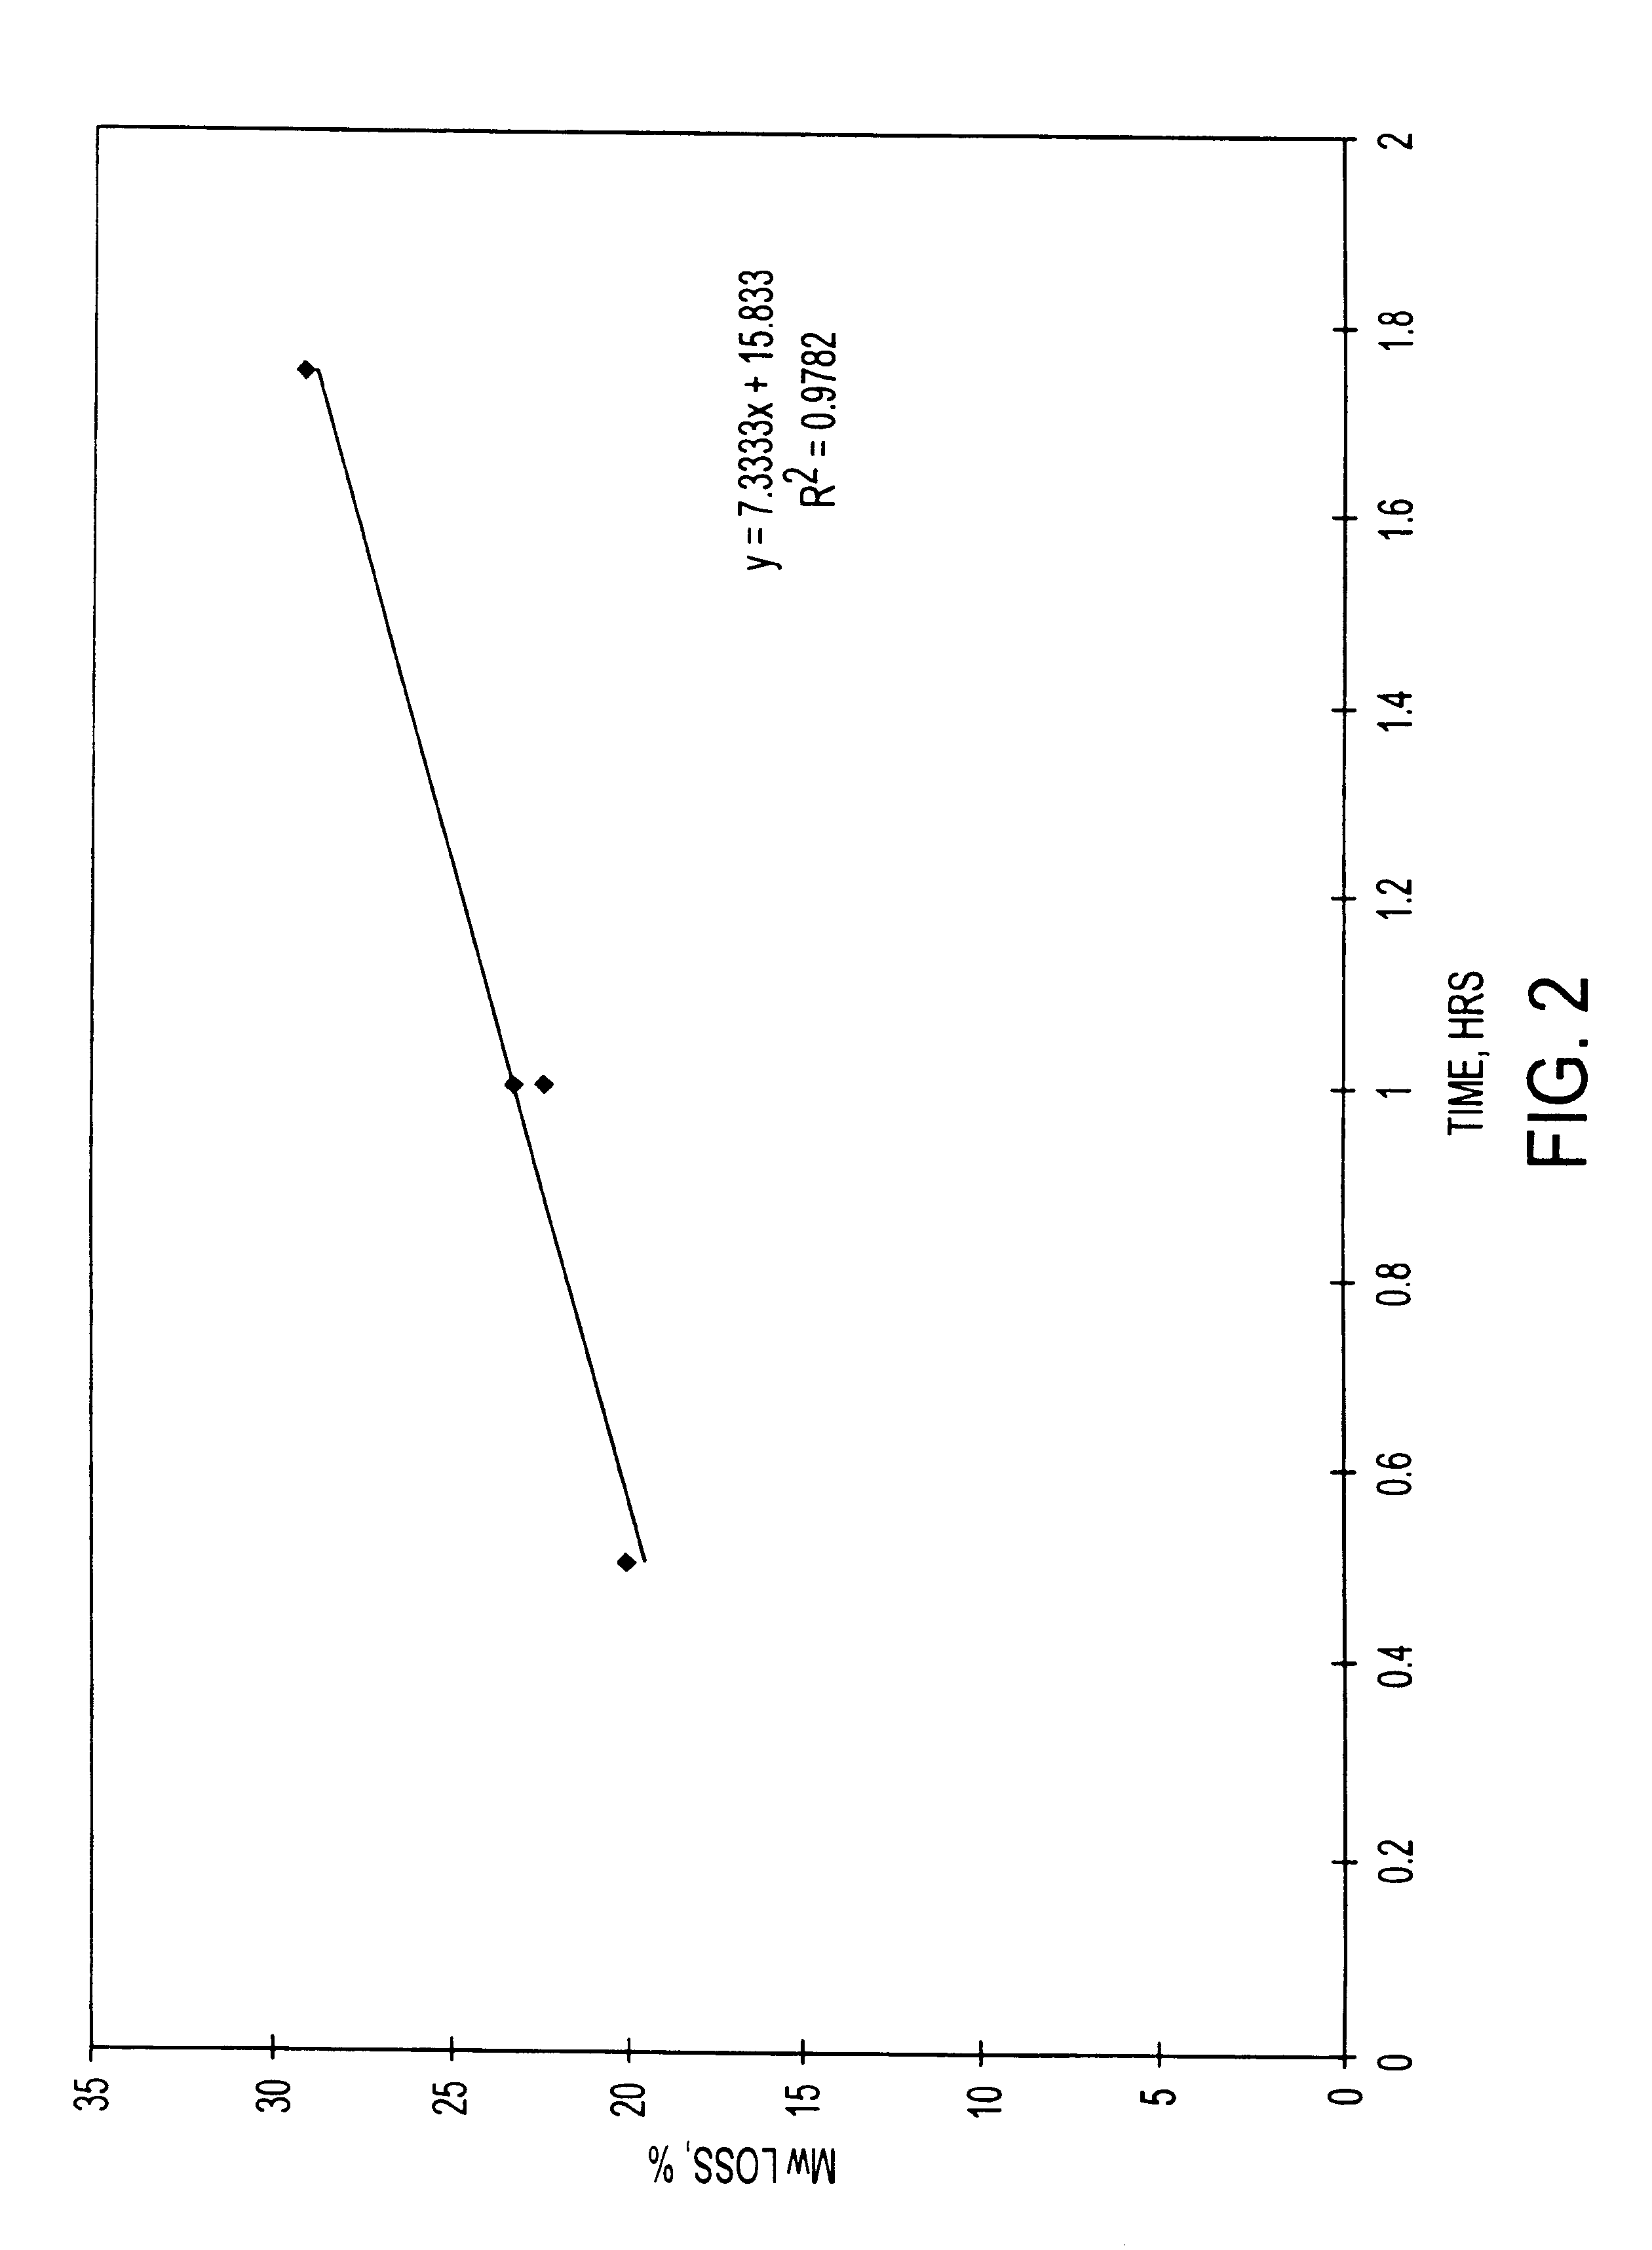 Method for preparing microparticles having a selected polymer molecular weight